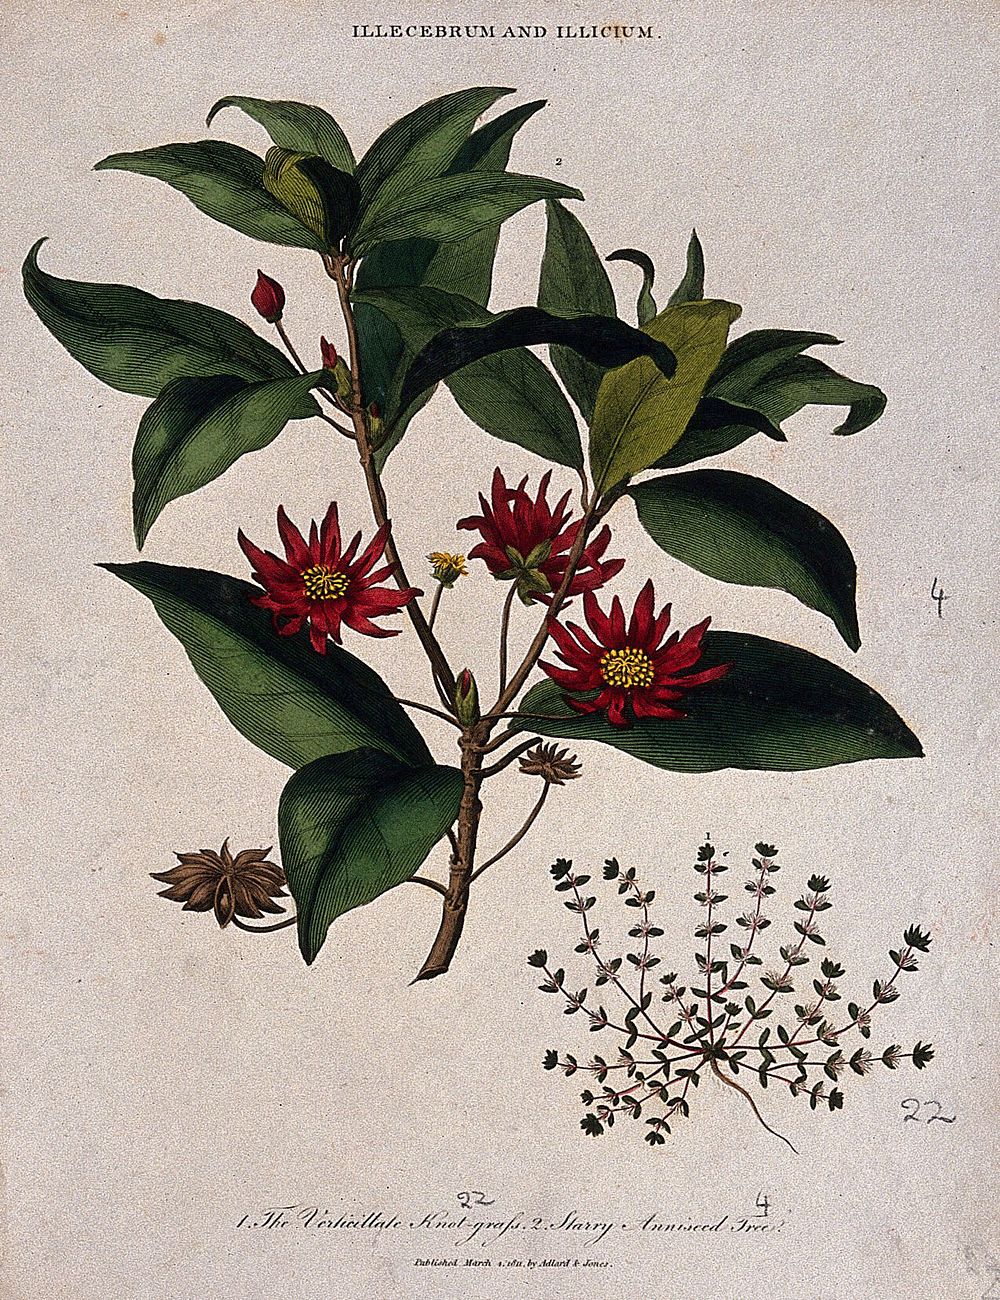 Two flowering plants: a knot grass (Illecebrum species) and star anise tree (Illicium verum). Coloured etching, c. 1811.